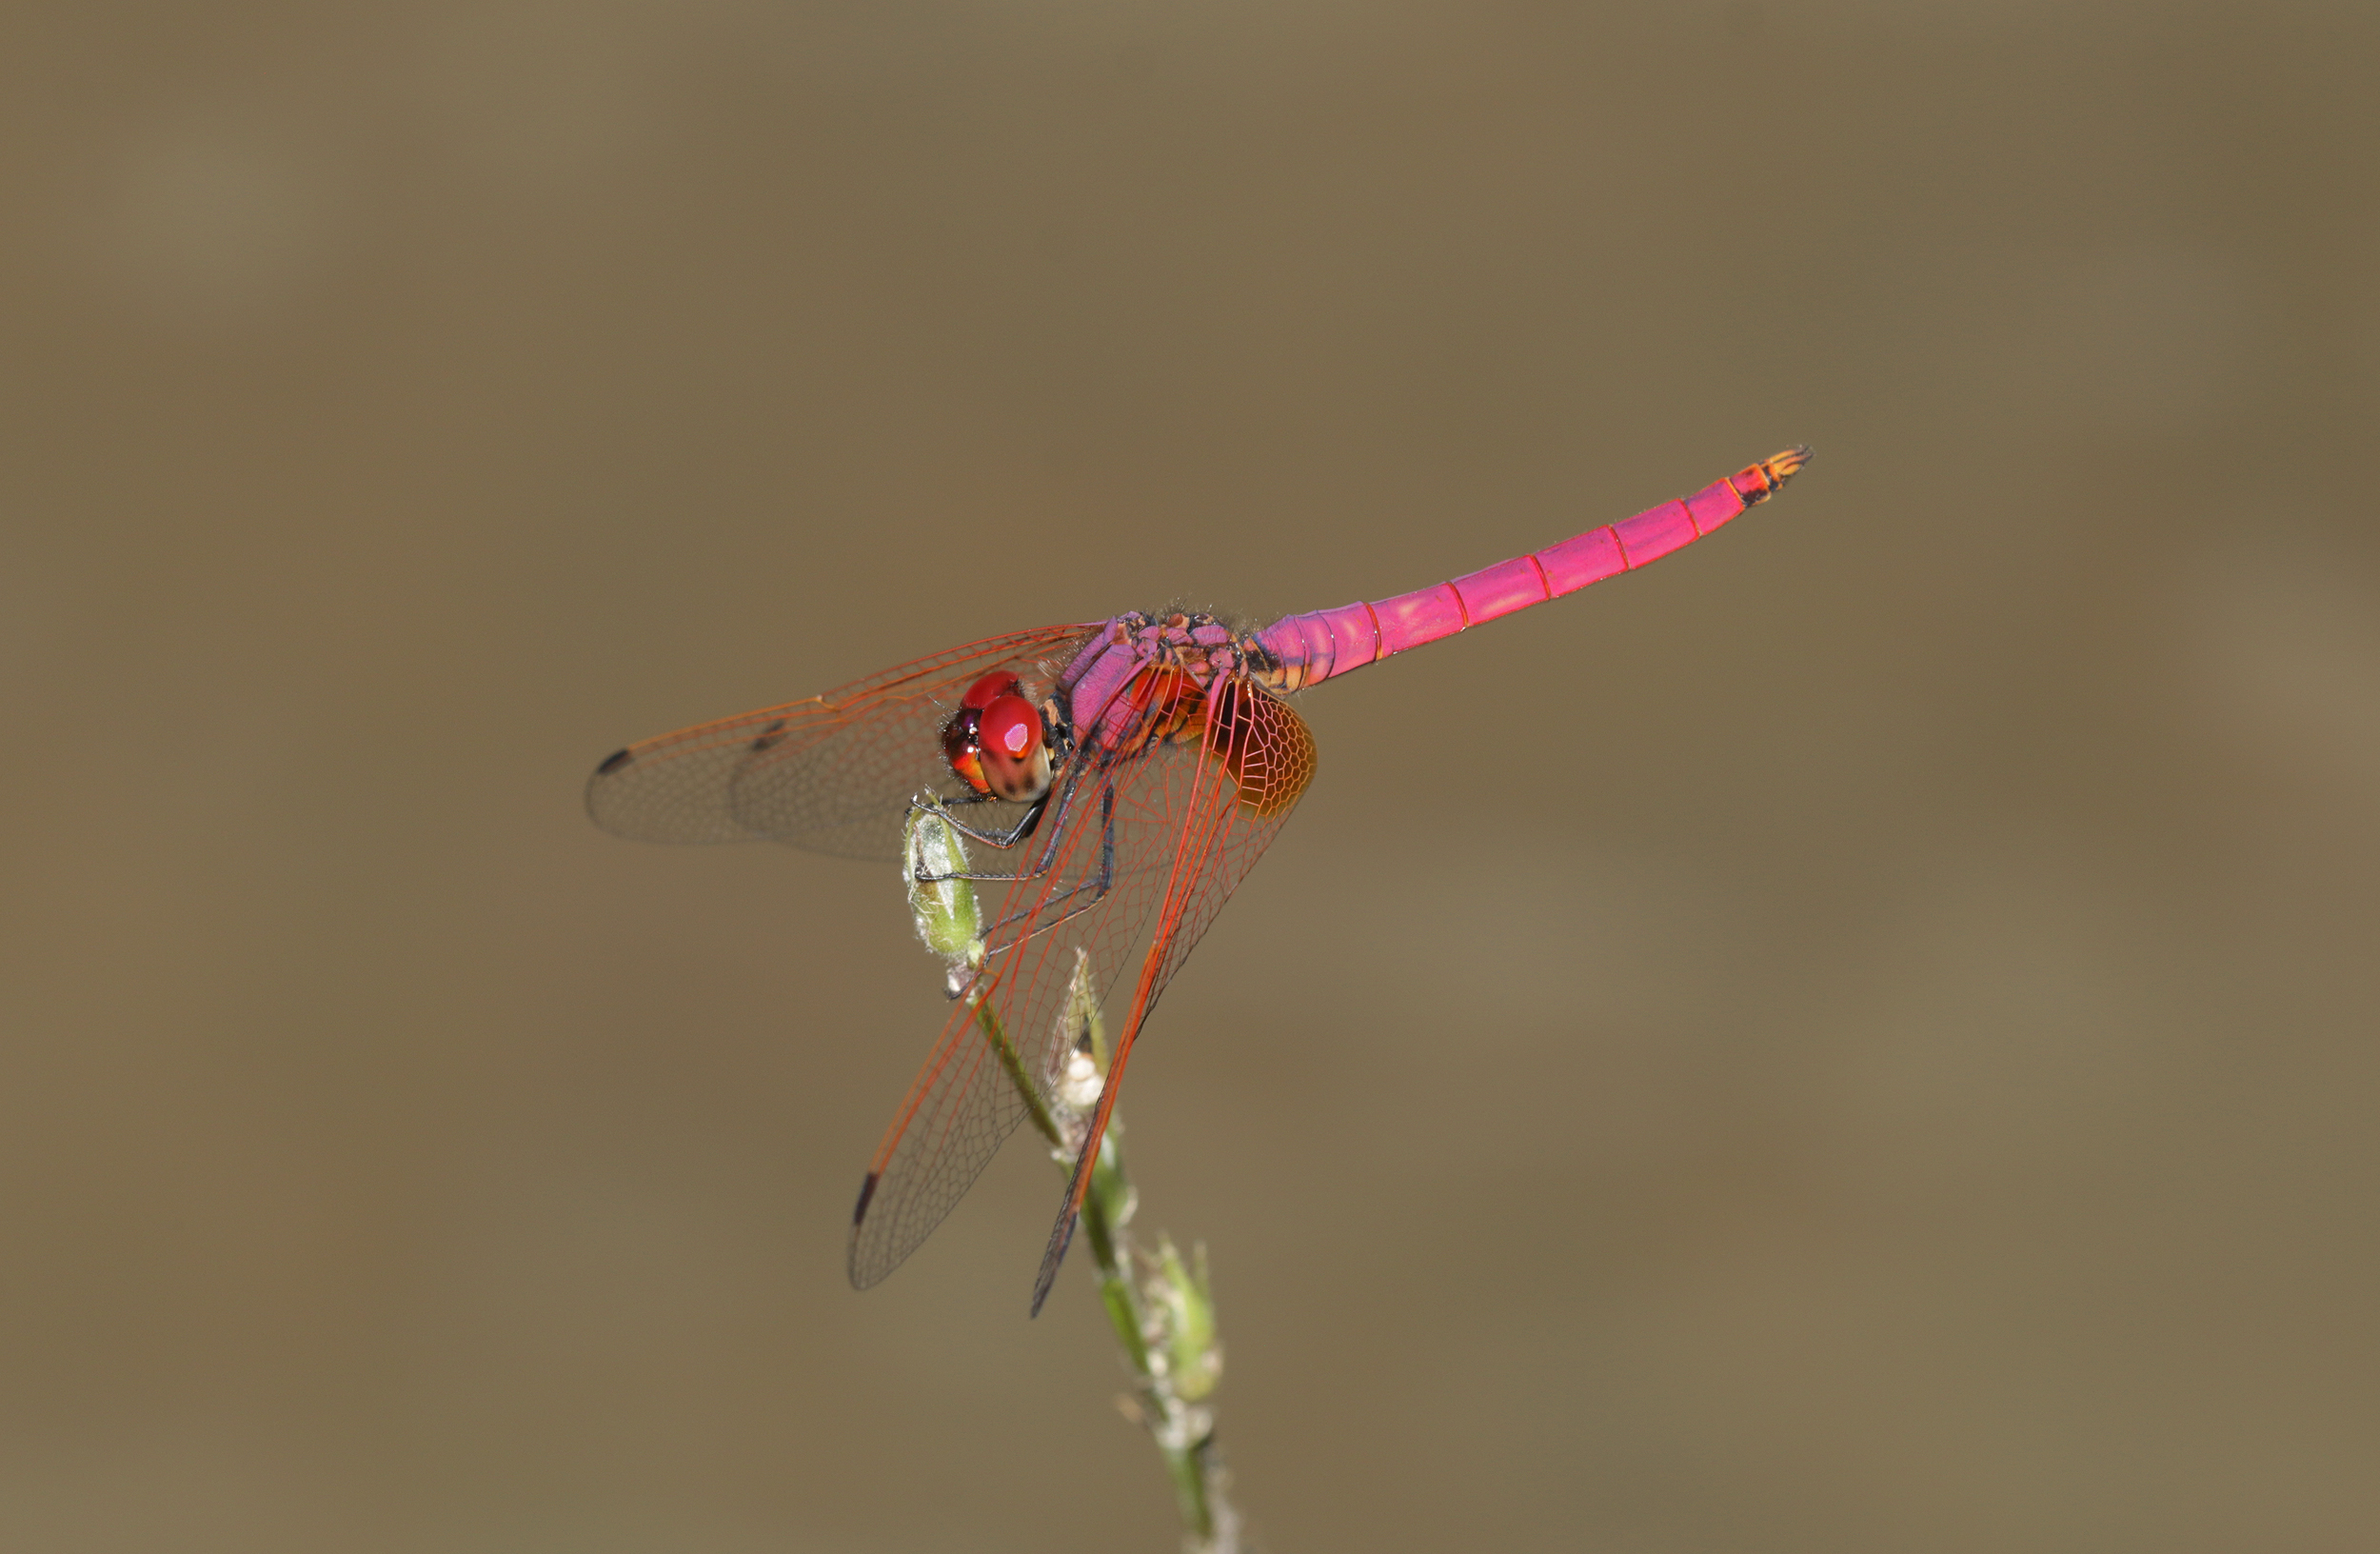 Malay dragonfly in The Malady